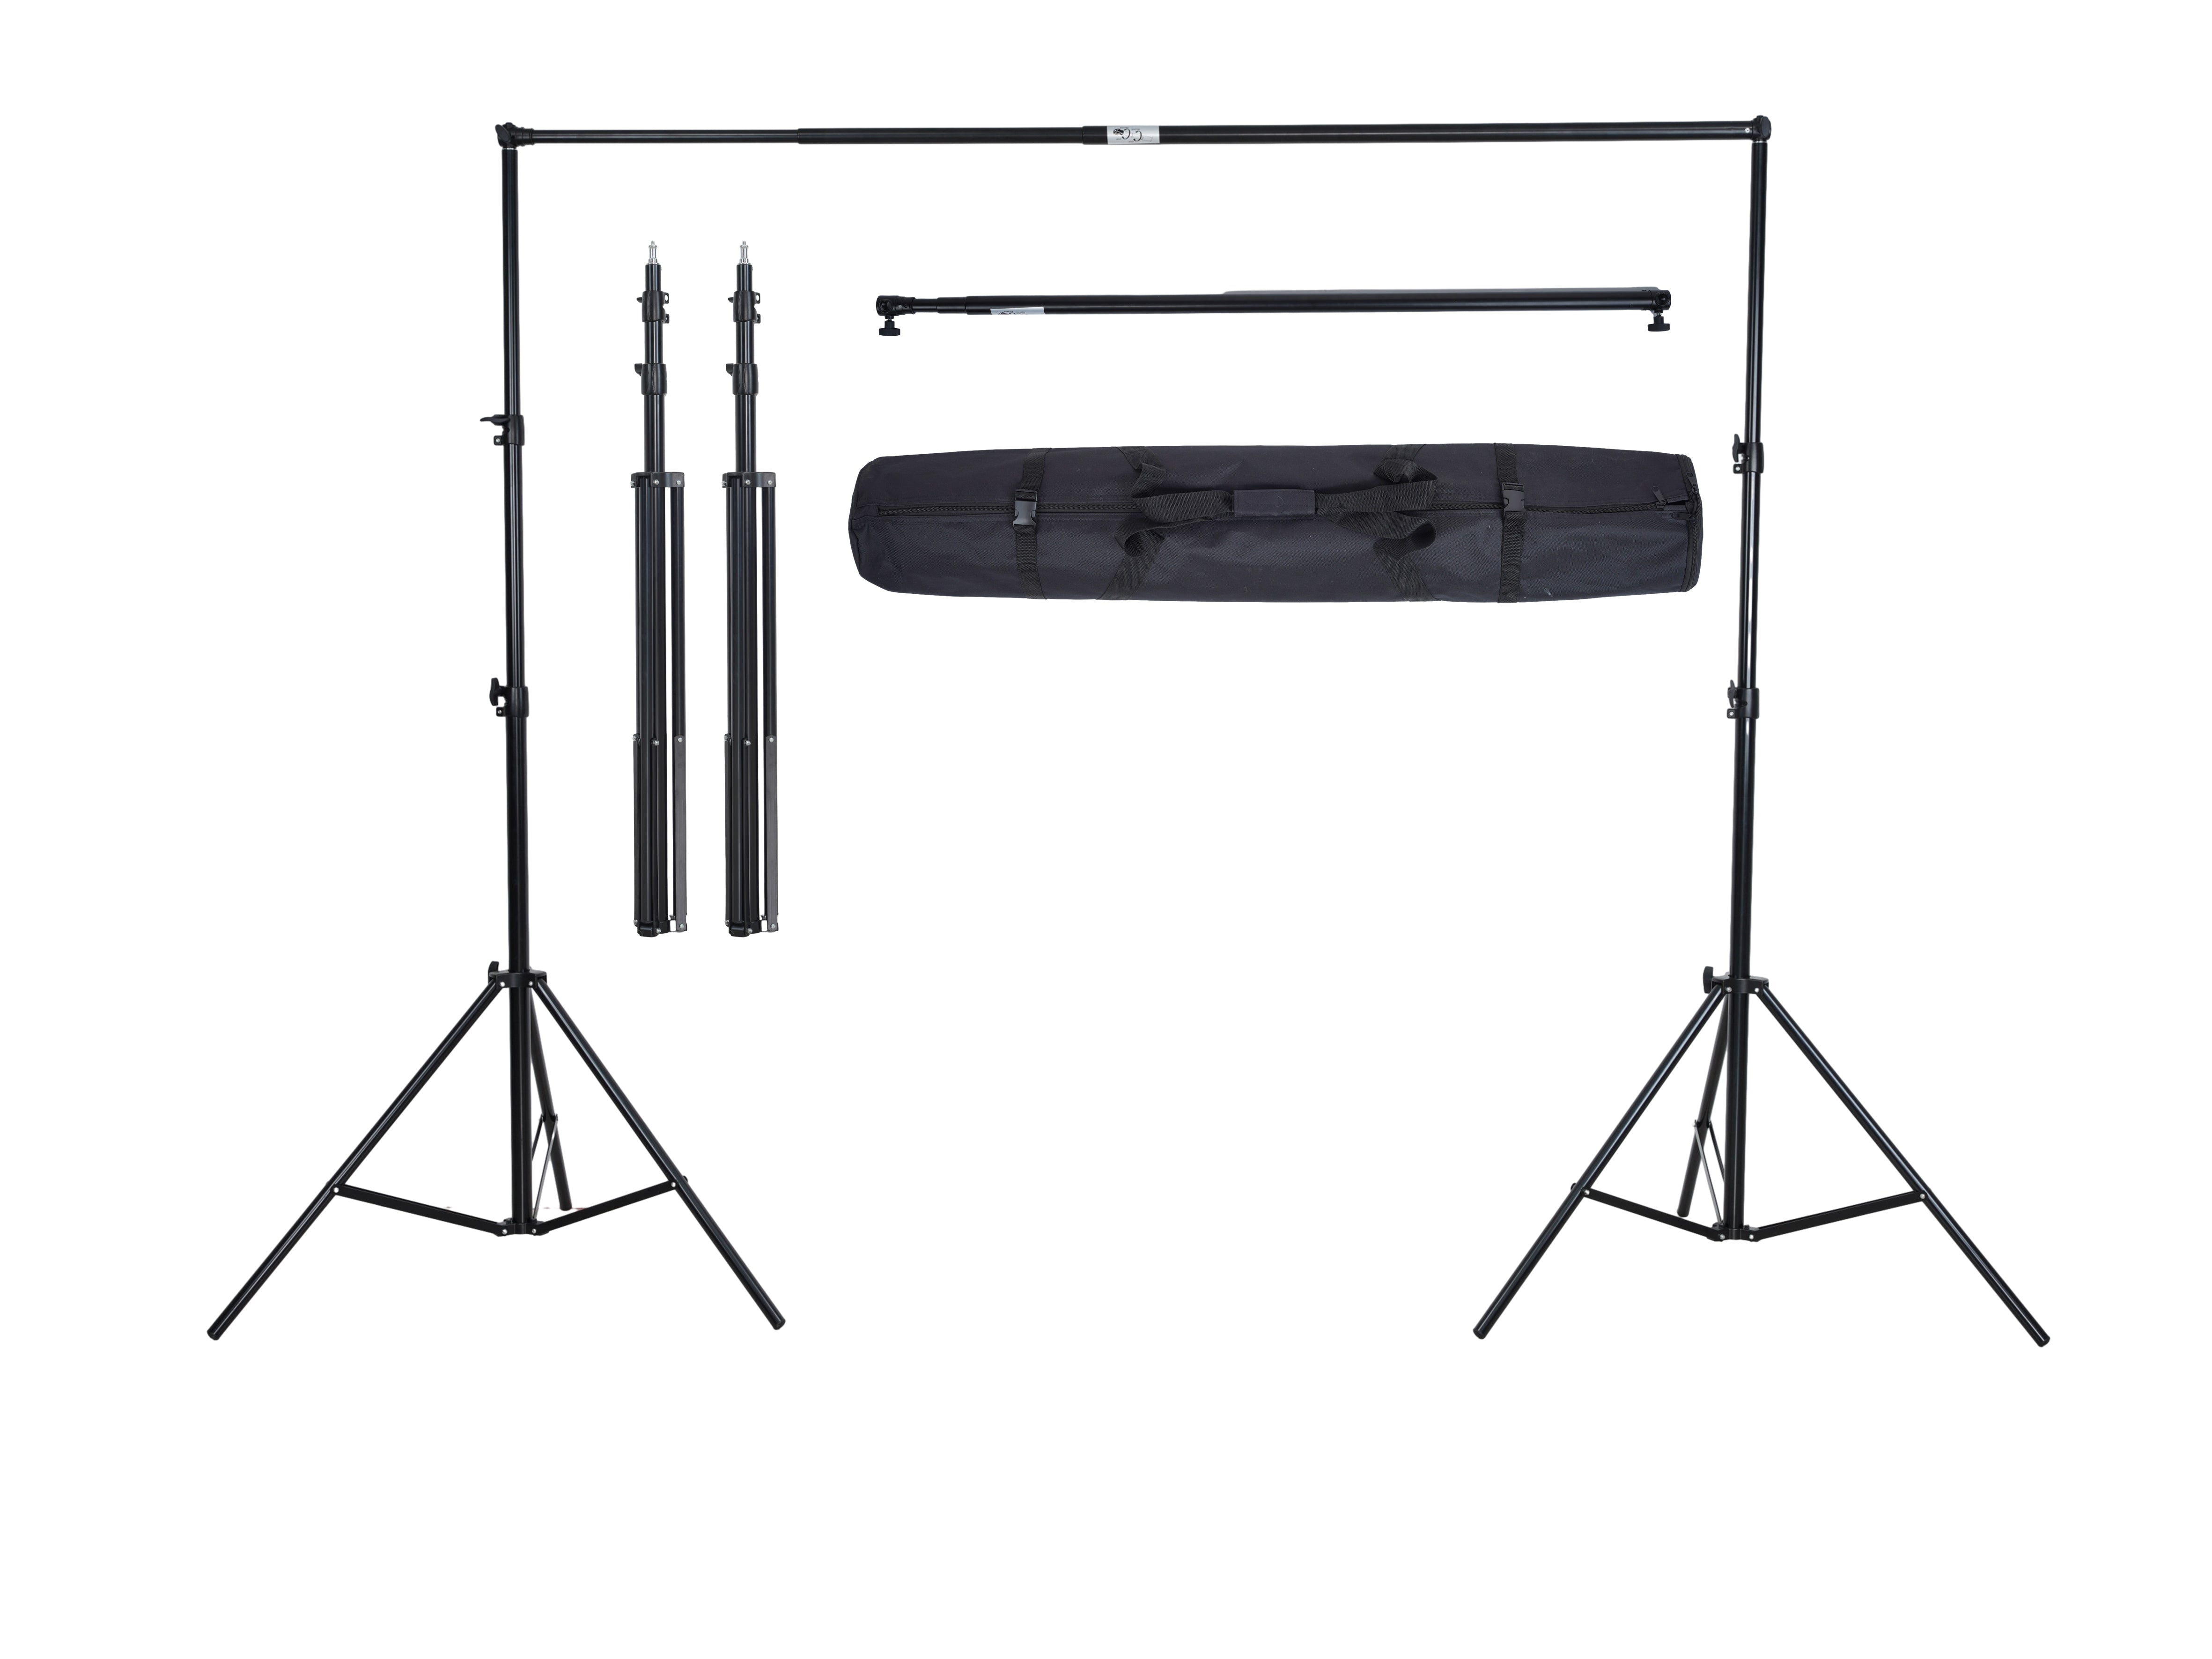 Durable construction of the backdrop stand